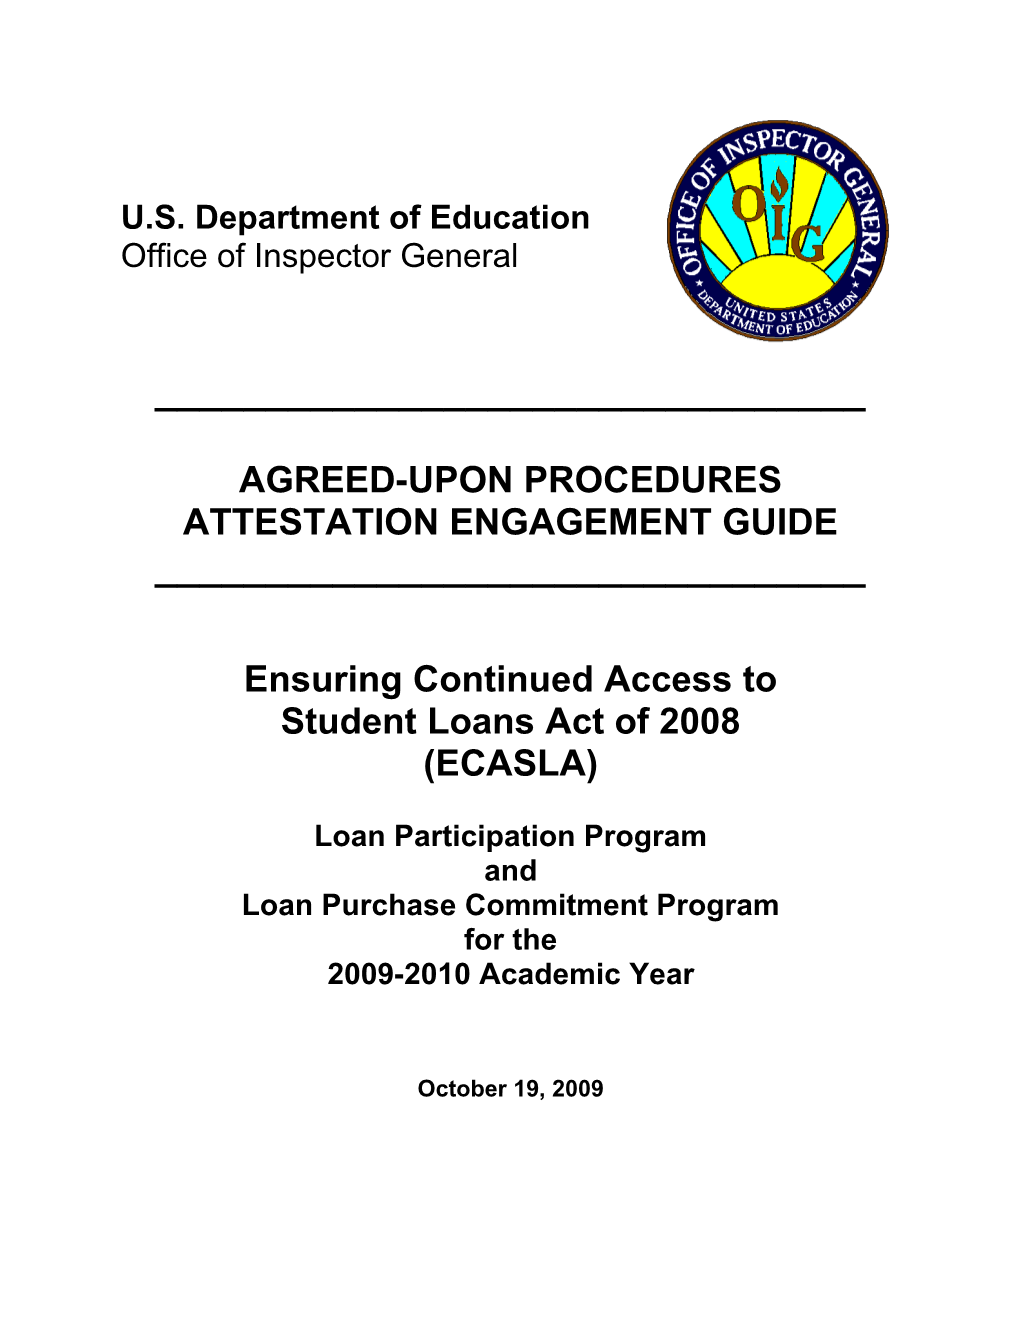 Agreed Upon Procedures (AUP) Attestation Engagement Guide for the Ensuring Continued Access